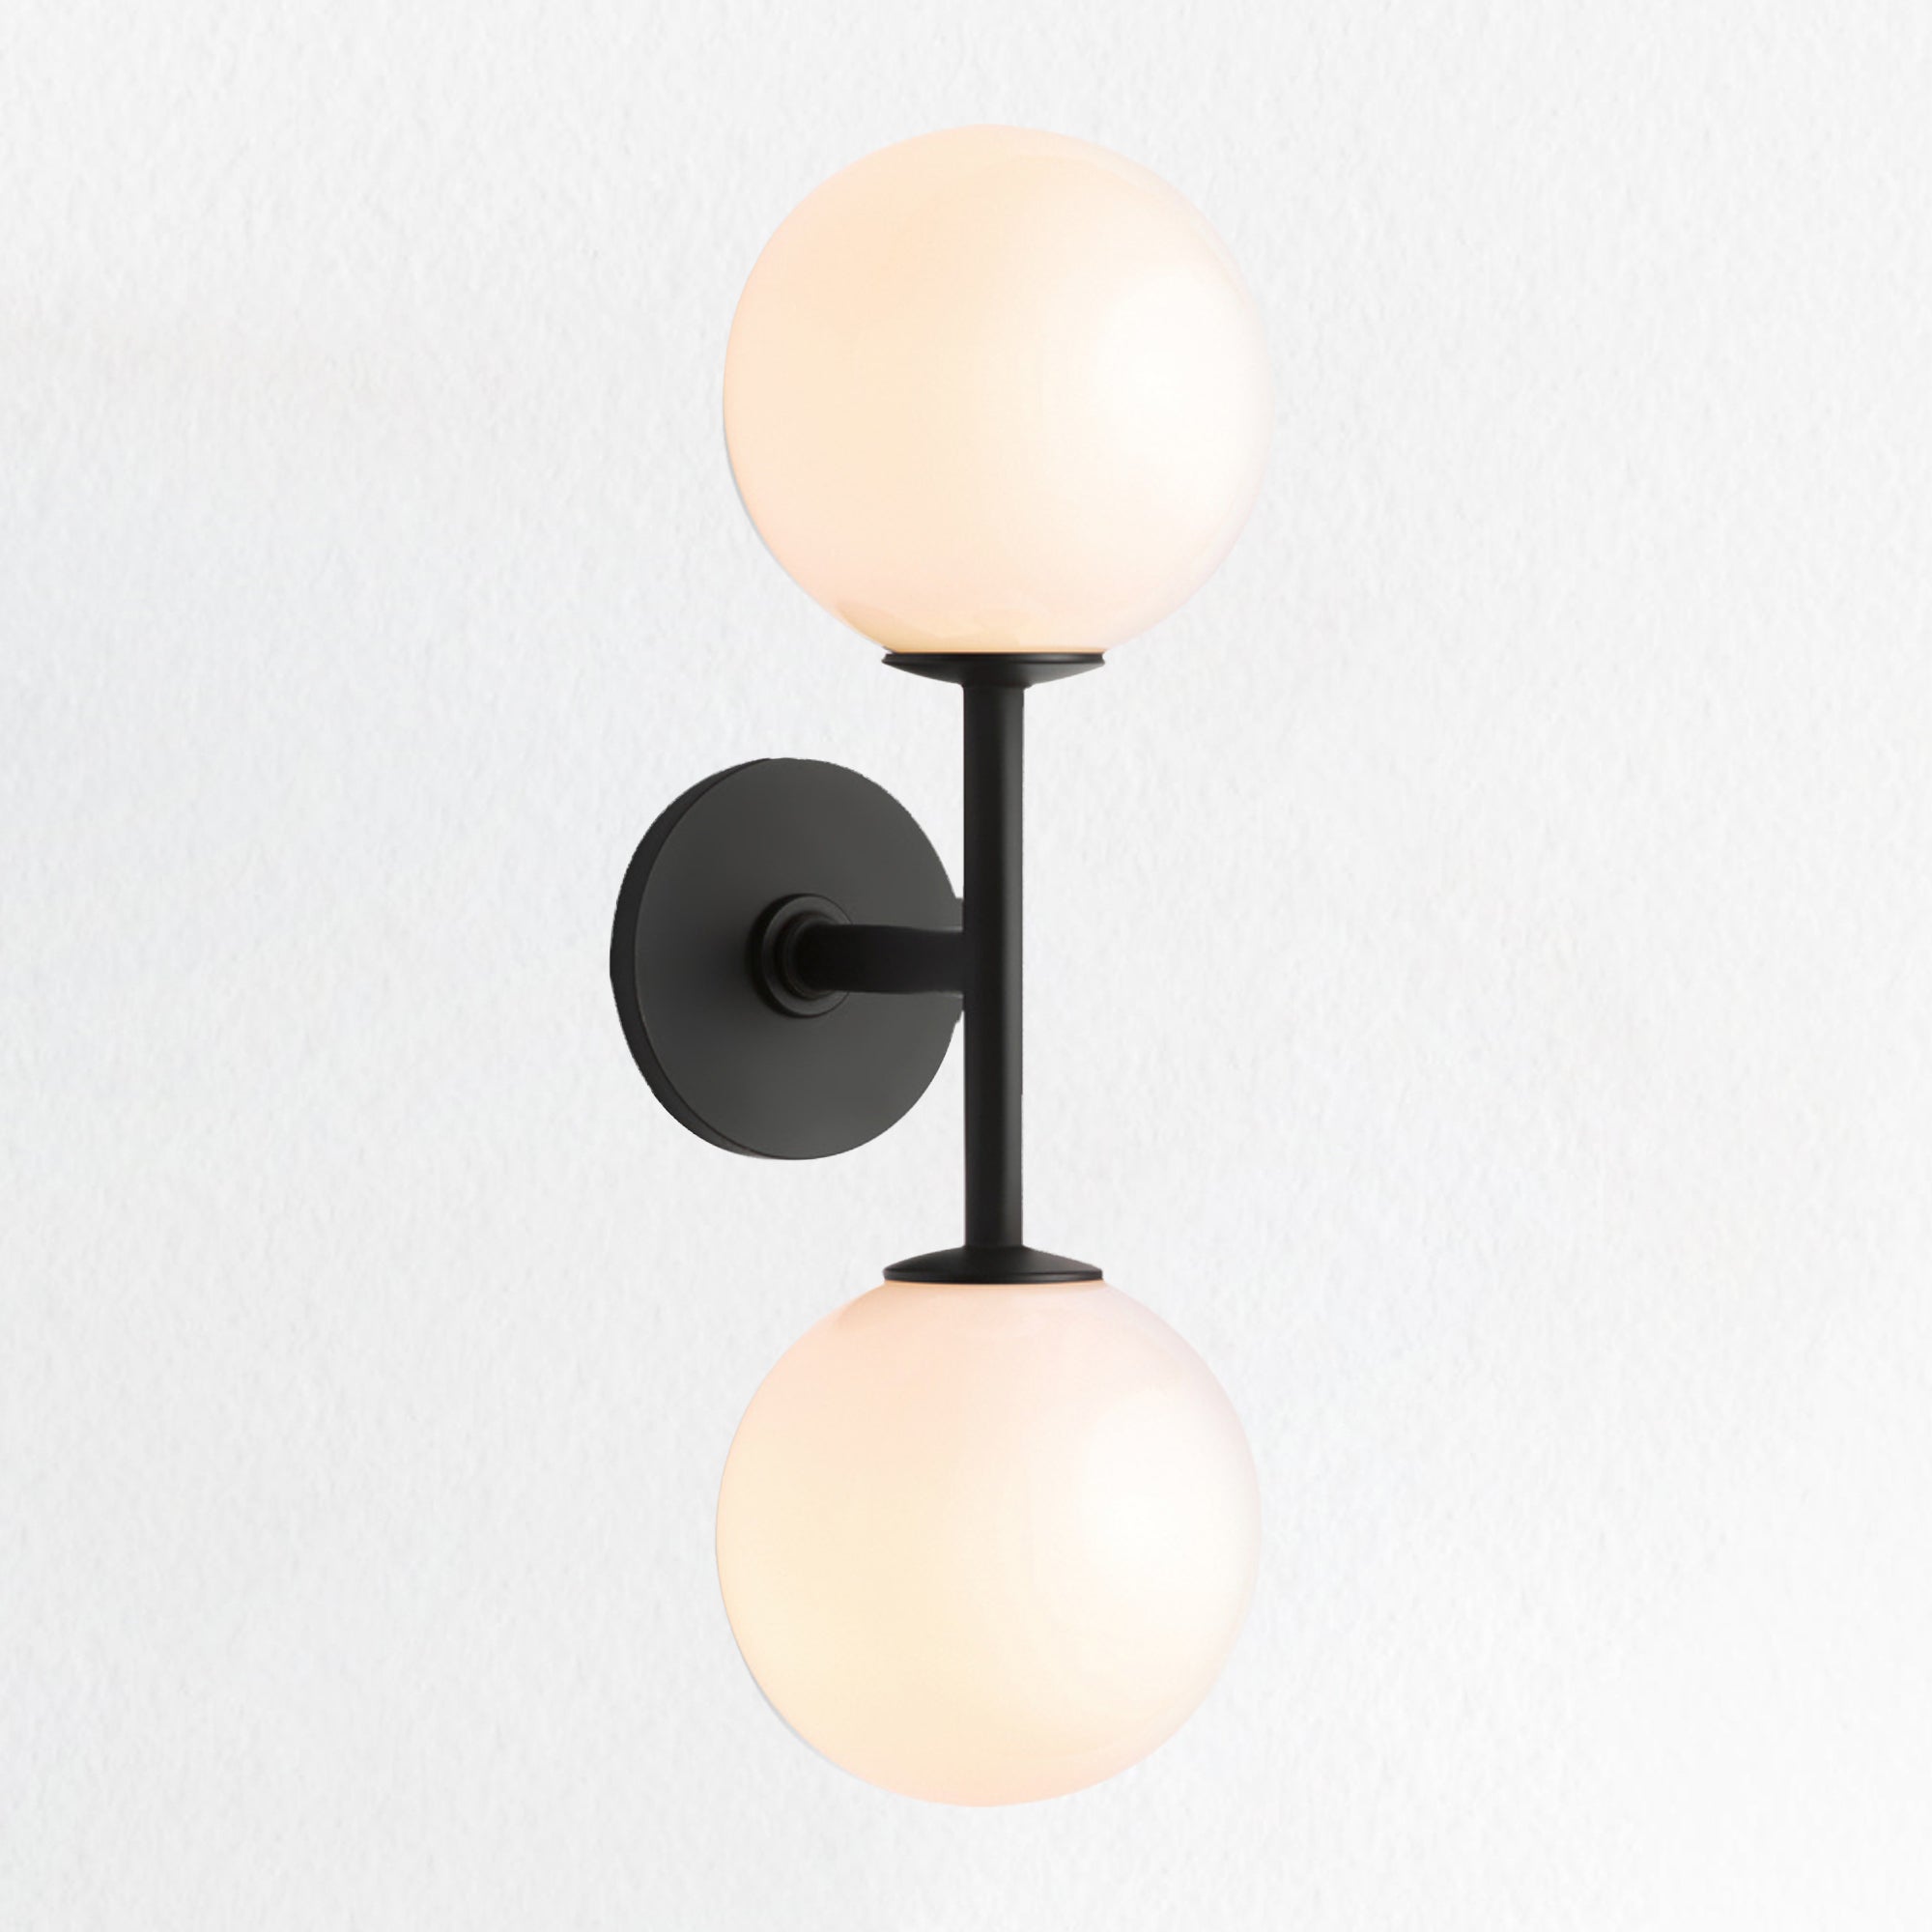 Double-ended Pole Ball, Double Sconce